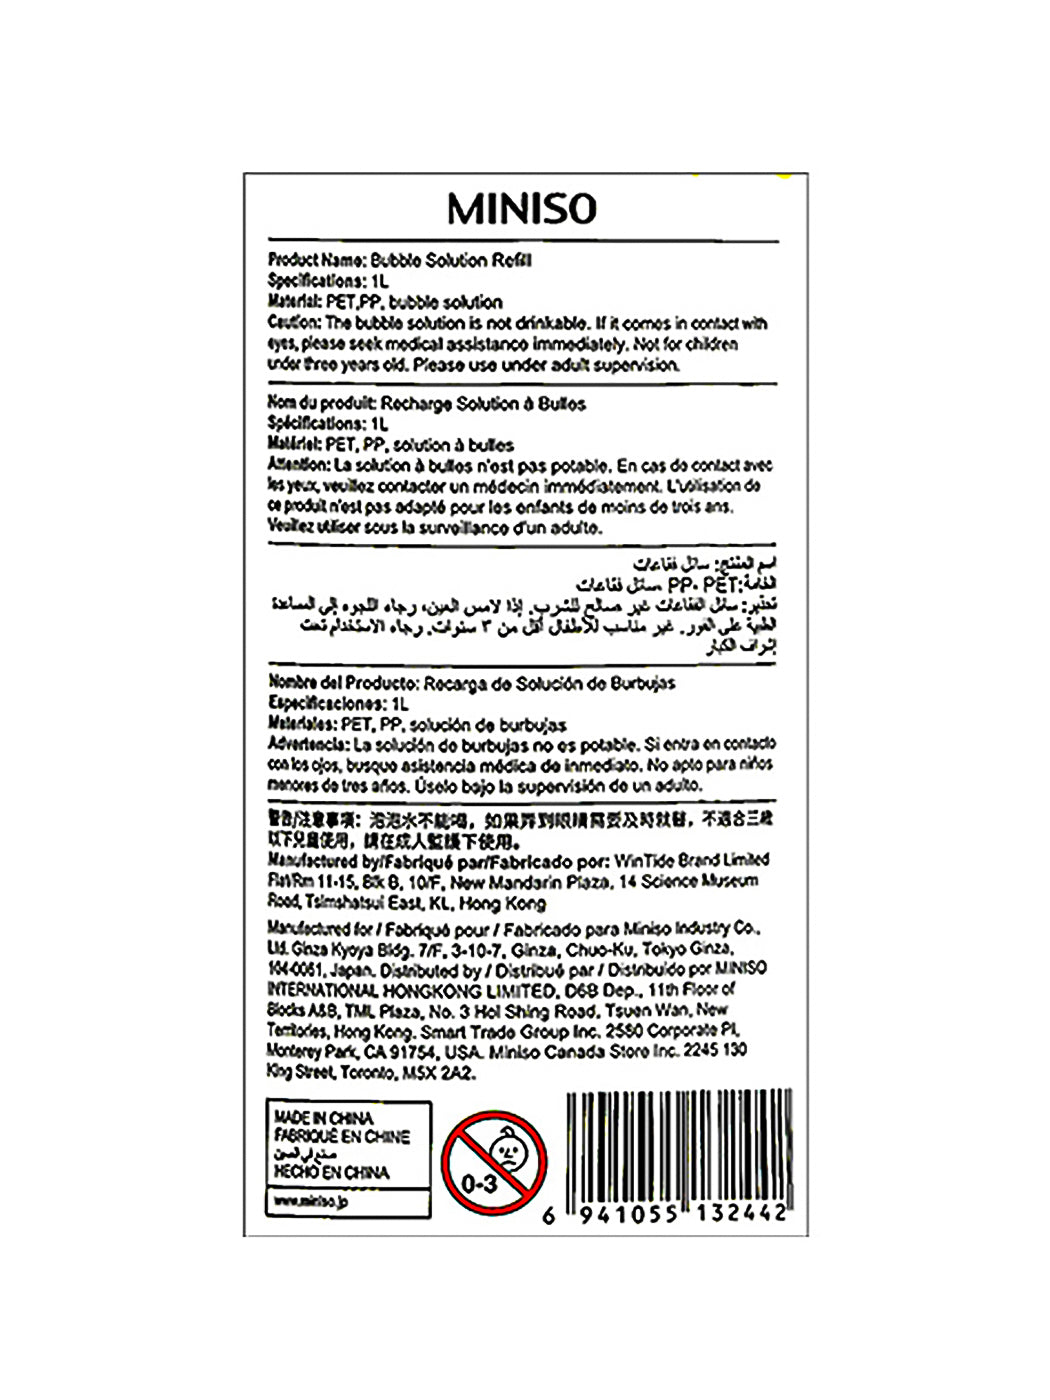 MINISO BUBBLE SOLUTION REFILL 2007966210106 SAND TOYS